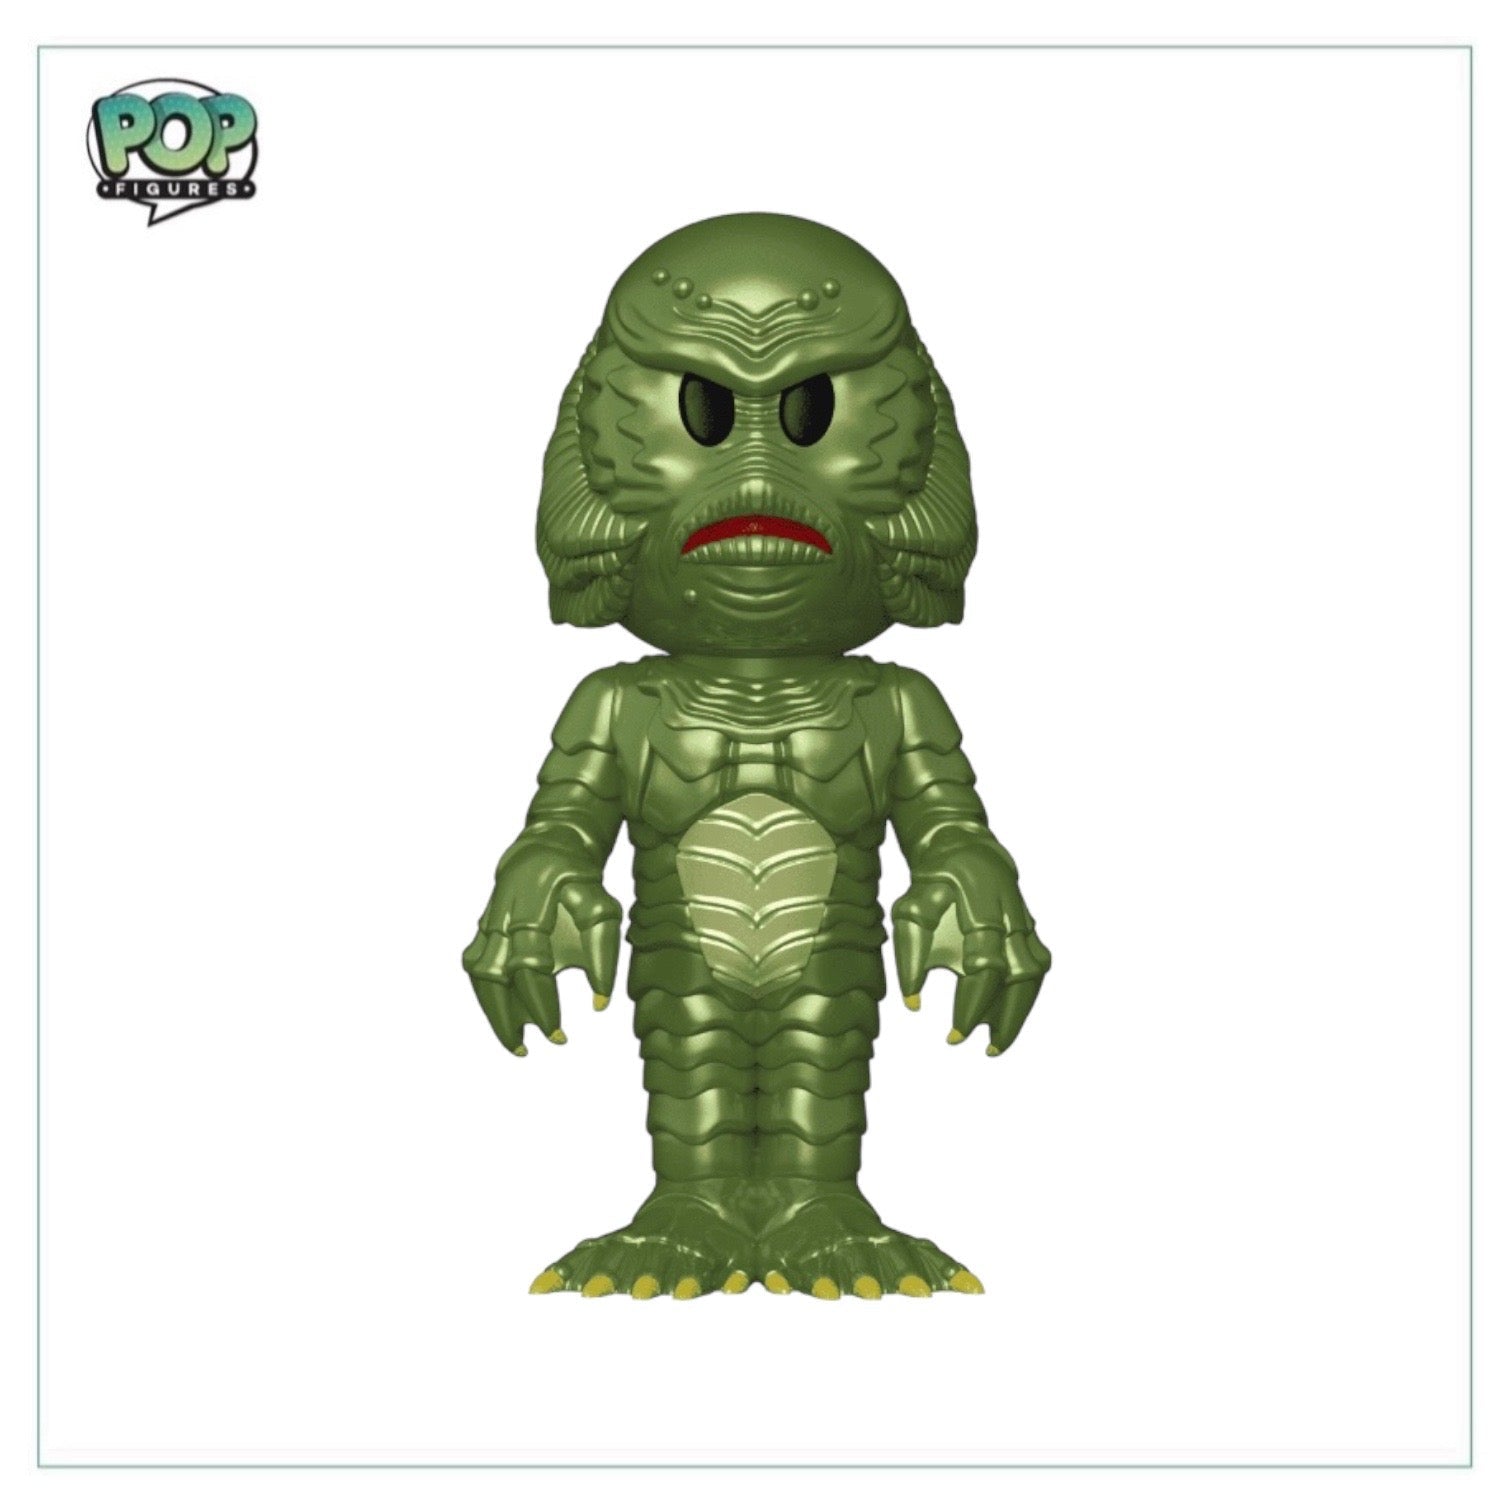 Creature From The Black Lagoon Funko Soda Vinyl Figure! - Universal Monsters - International LE7500 Pcs - Chance of Chase